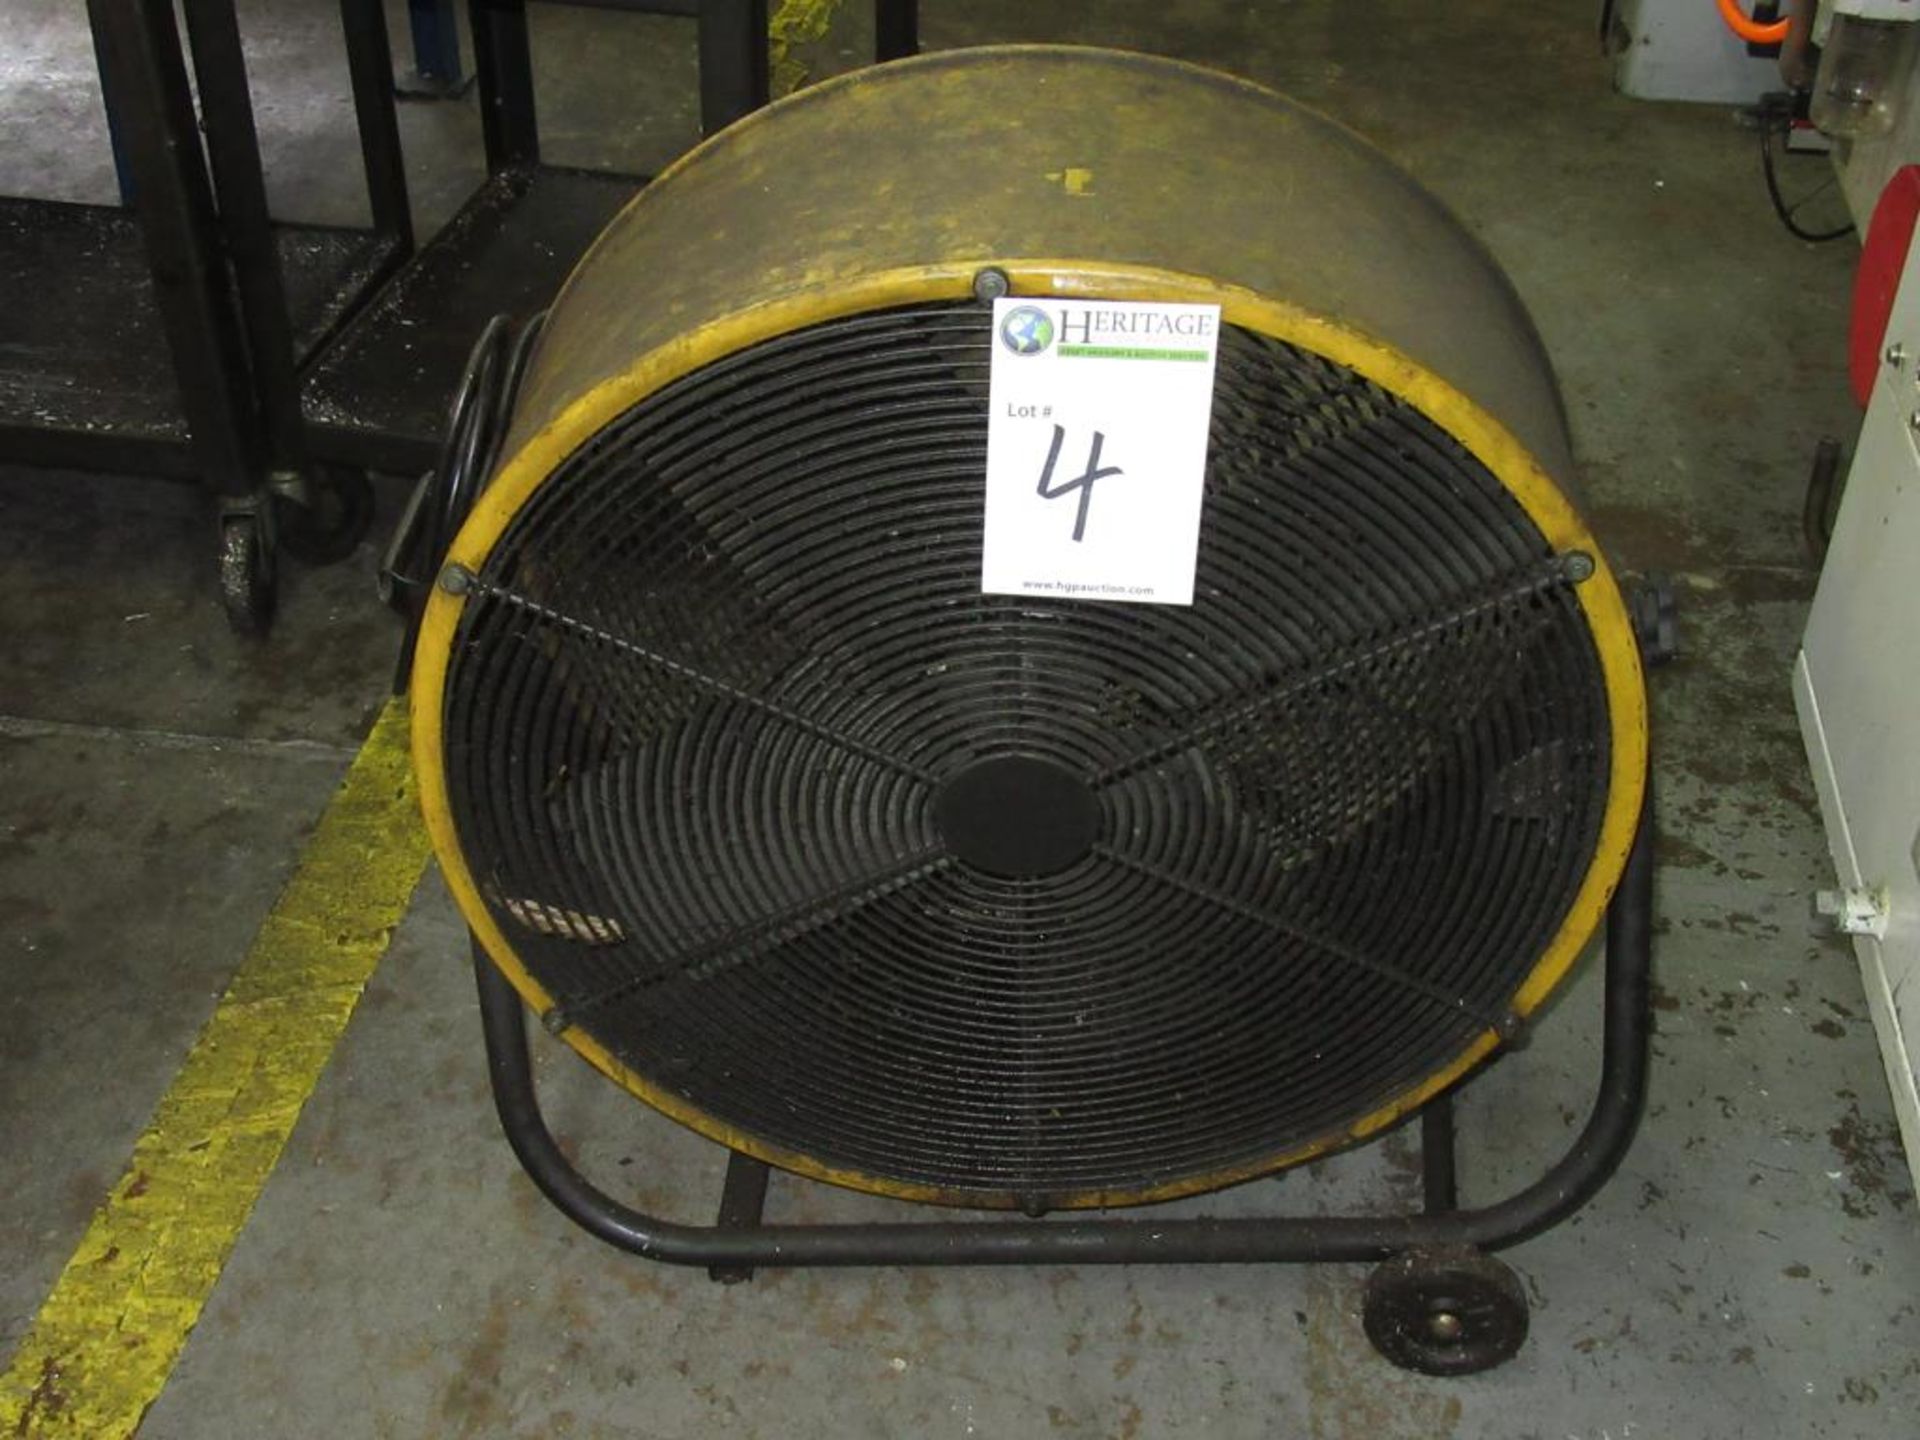 Maxx Air 26" Dia. Floor Fan with 2-Wheels. HIT# 2194891. Asset(s) Located at 14582 Goldenwest